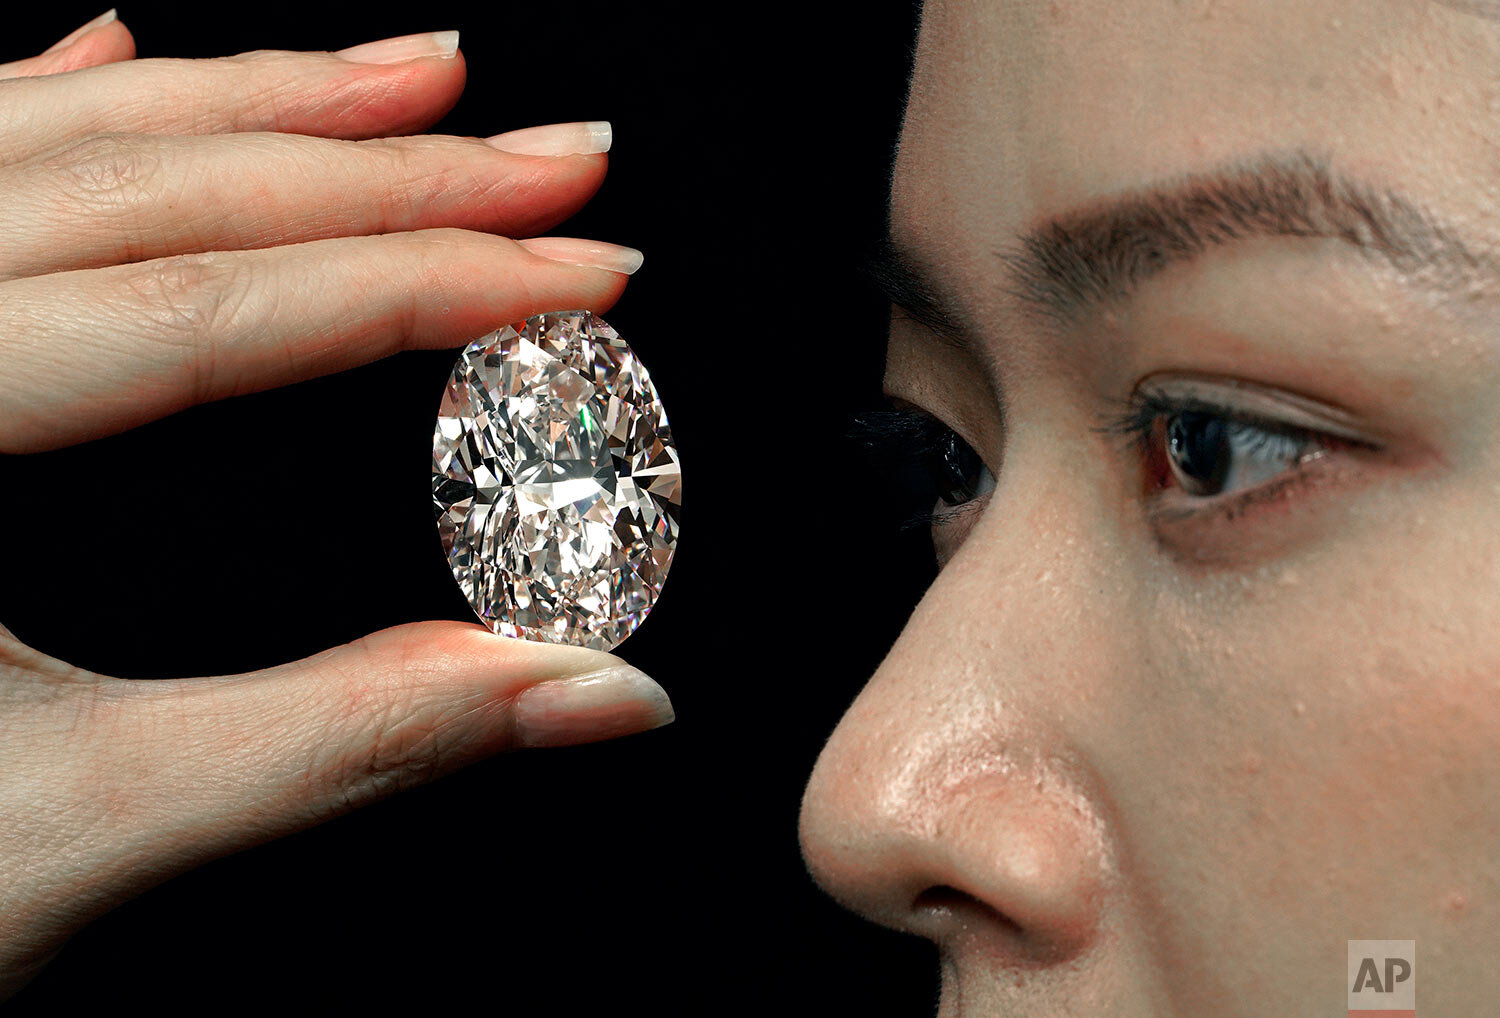  A 102.39 carat, D color, flawless diamond is displayed by a model at a Sotheby's auction room in Hong Kong Monday, Sept. 28, 2020.  (AP Photo/Vincent Yu) 